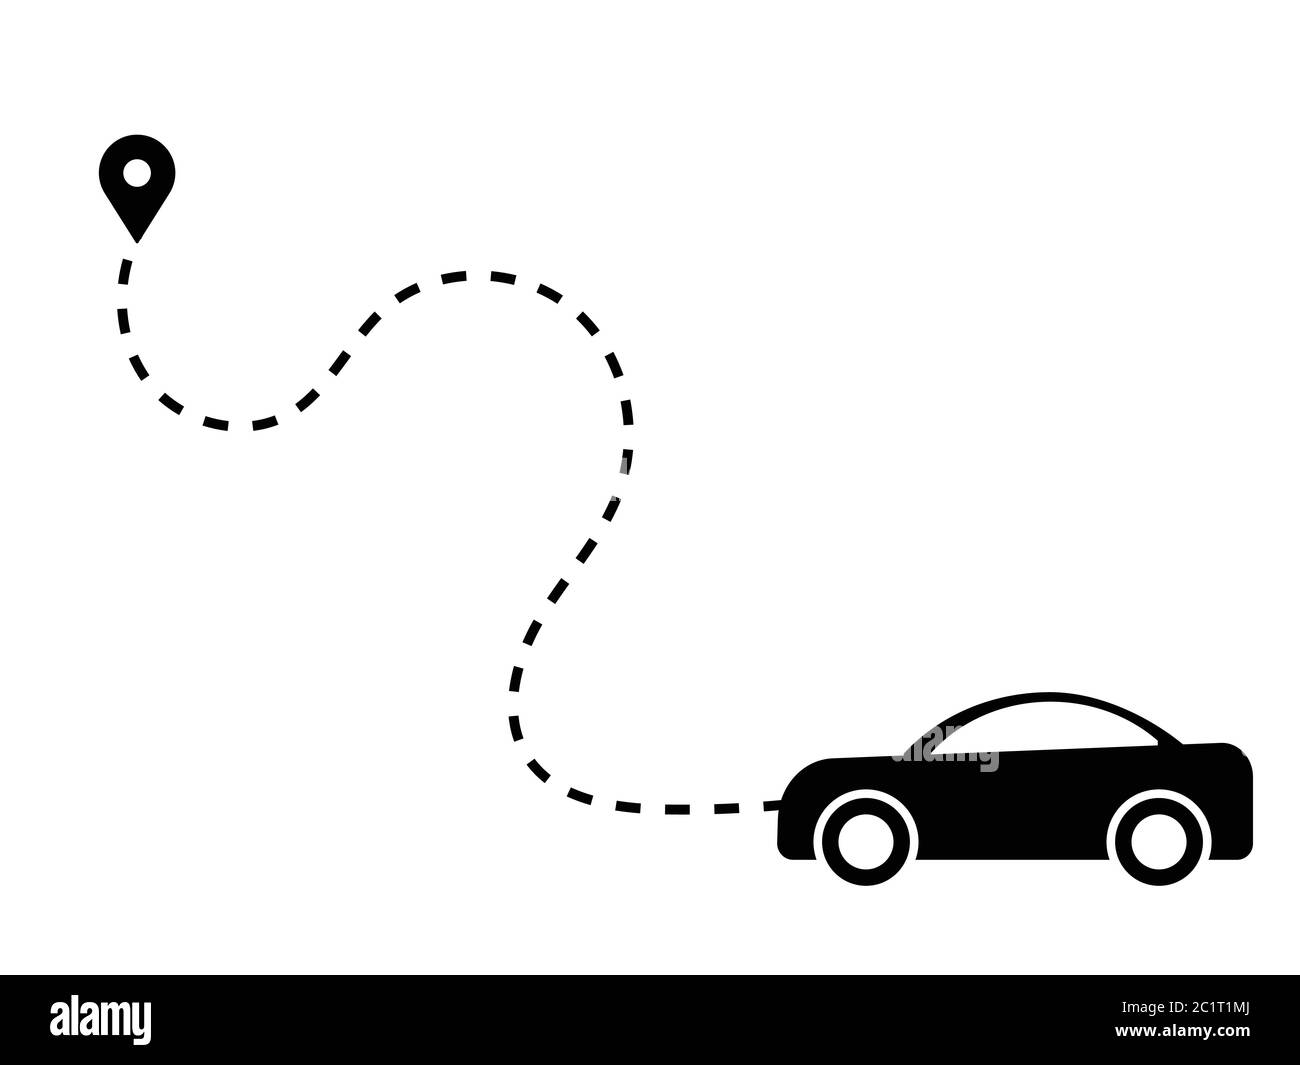 Car Dotted Path Line Driving Towards Destination Journey. Black Illustration Isolated on a White Background. EPS Vector Stock Vector